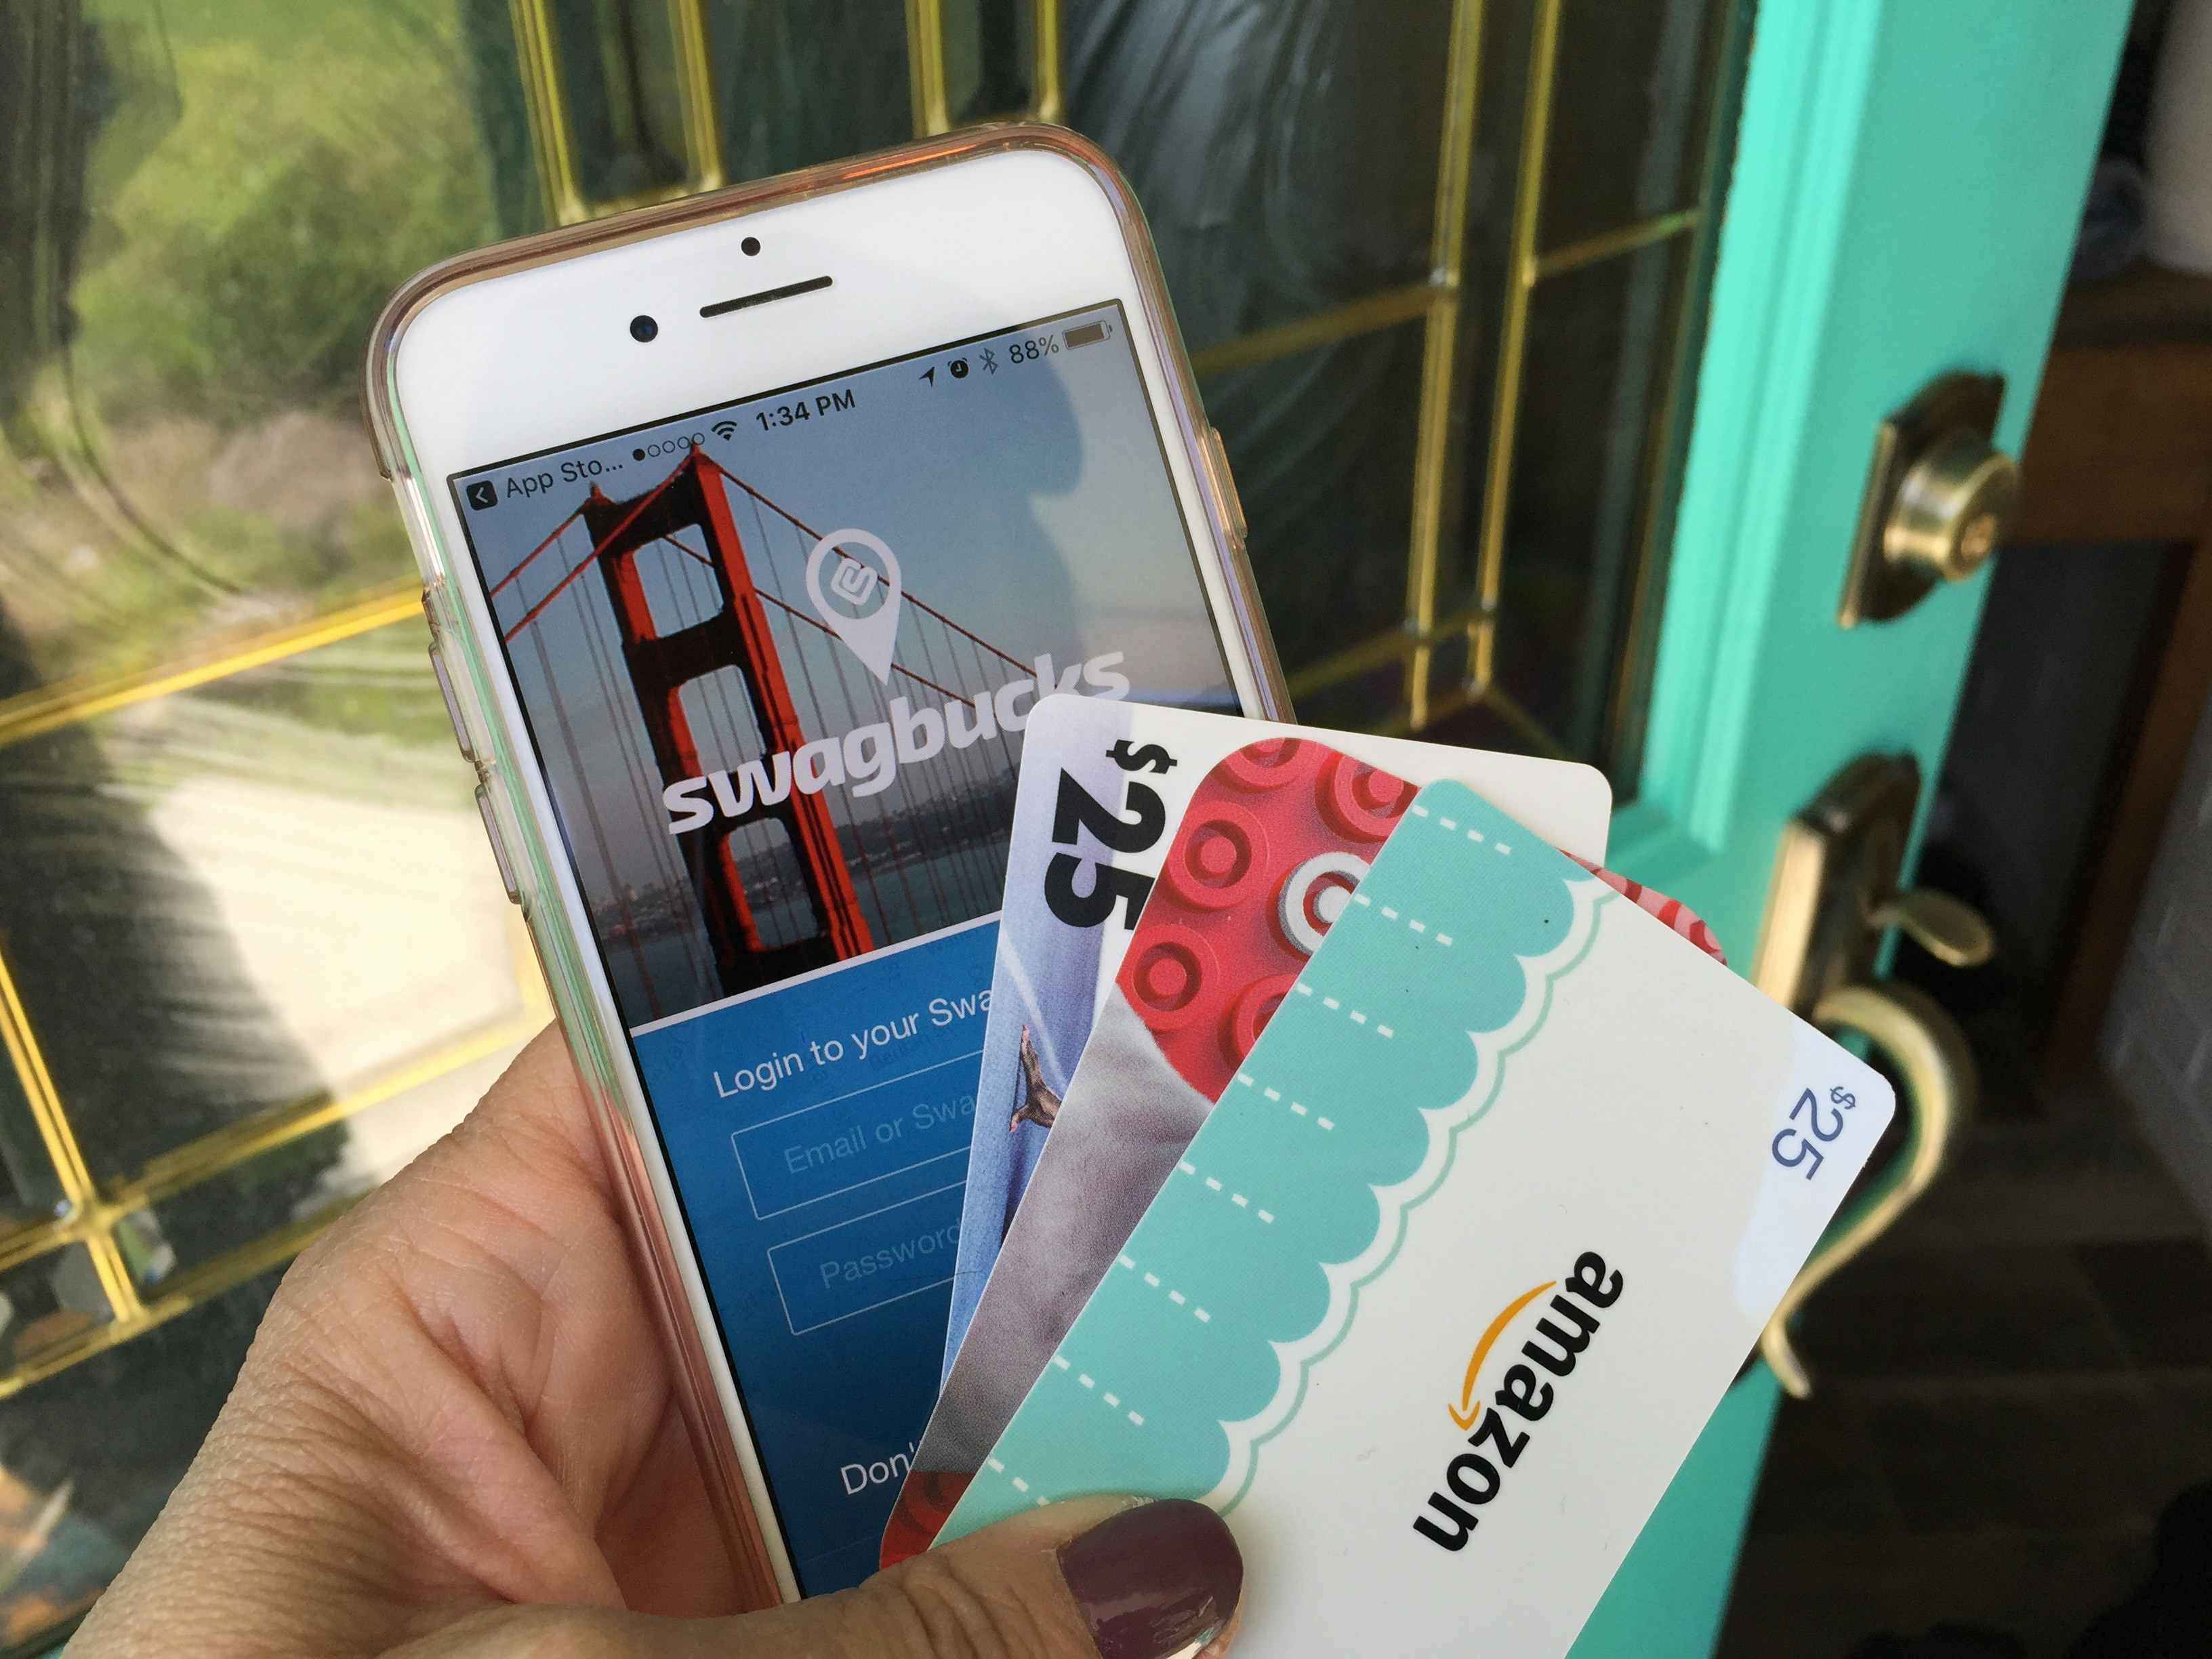 Swagbucks app with gift cards in a persons hand.